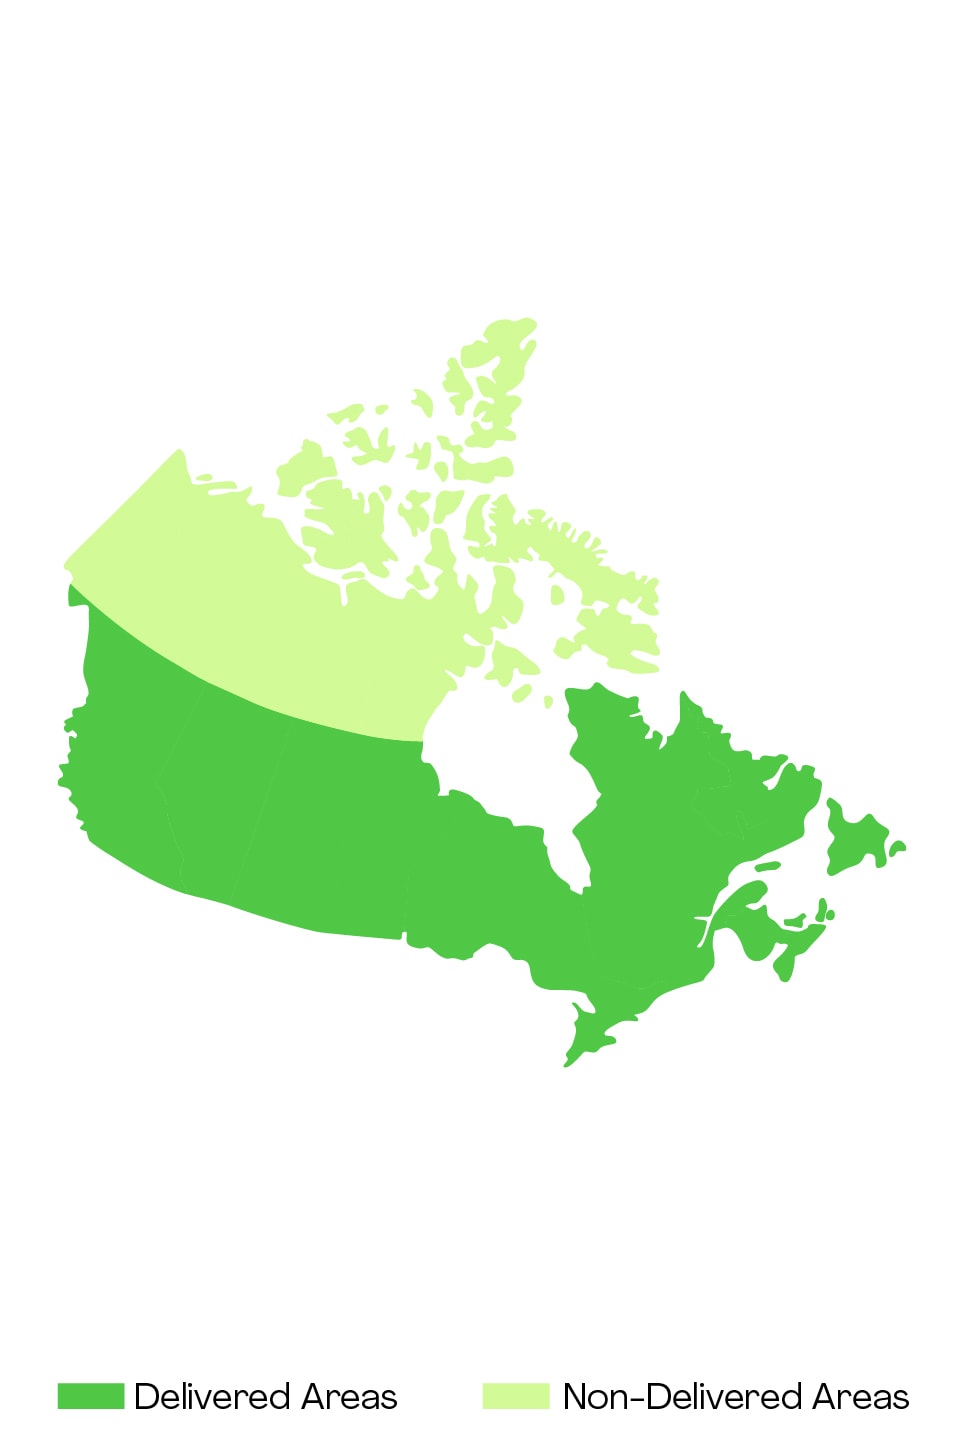 <h2>Food Box Delivery Across Canada </h2>